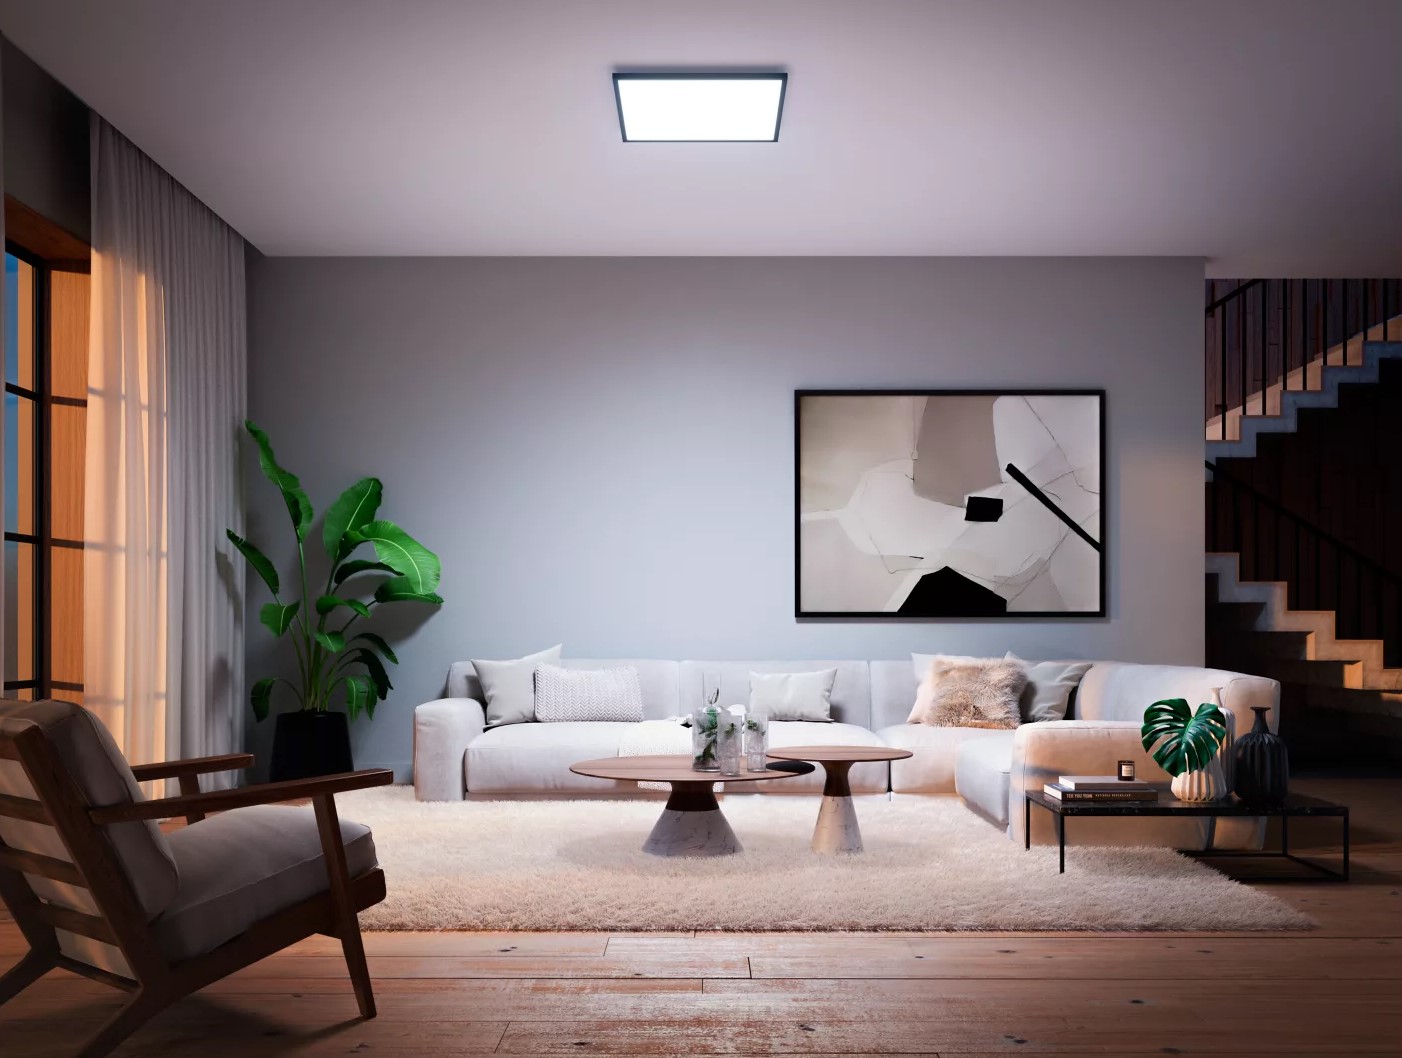  LED ceiling lamp Philips Hue Aurelle SQ IP20 39W dimmable black